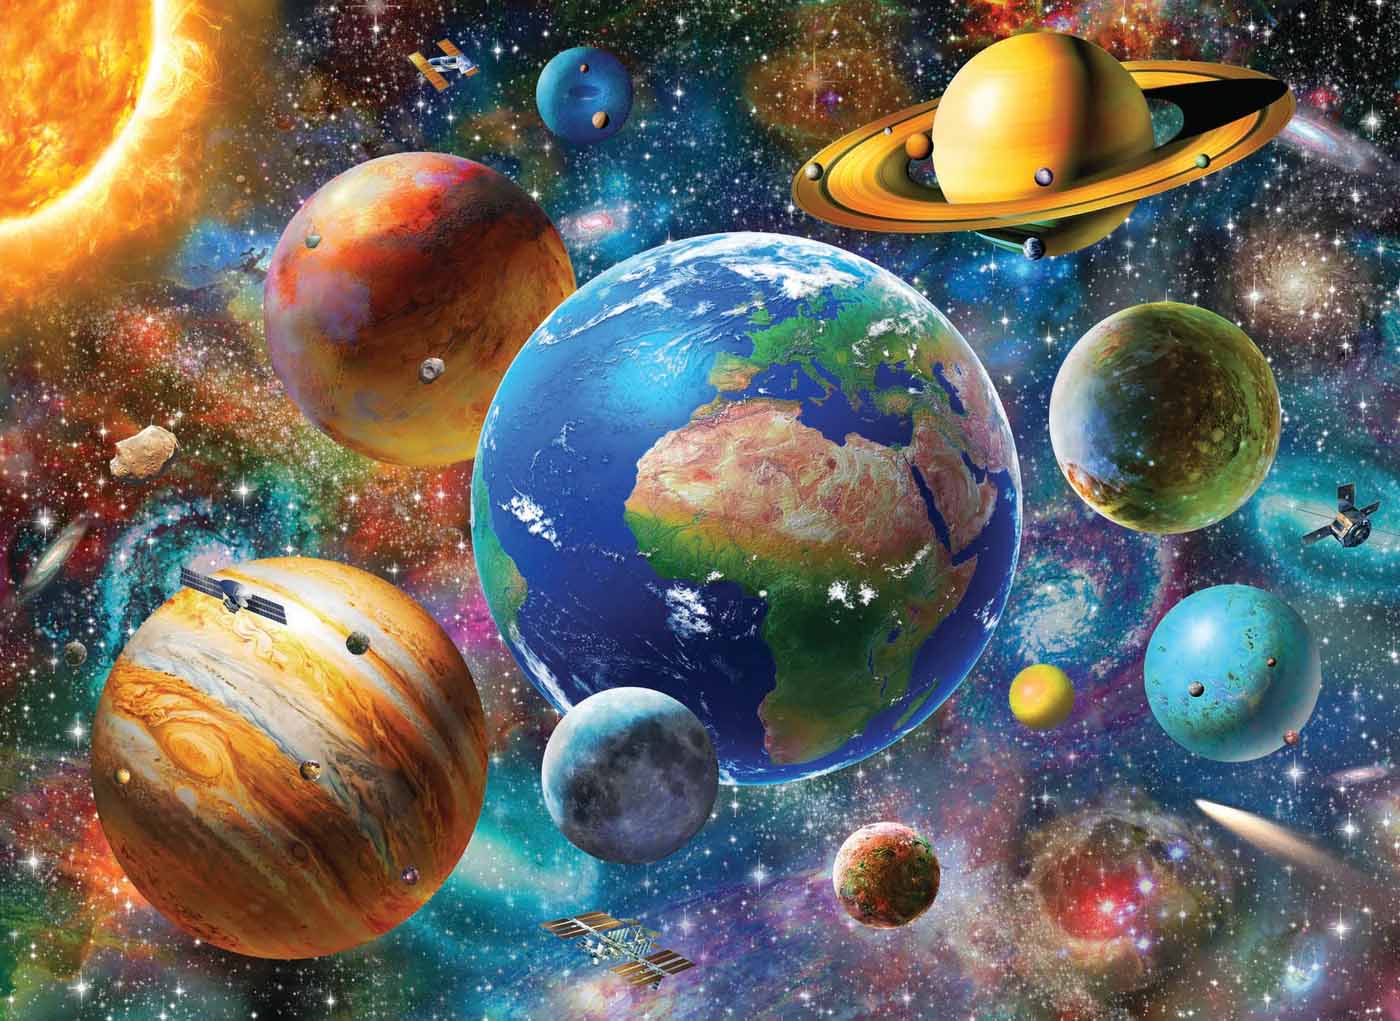 The Solar System Space Jigsaw Puzzle